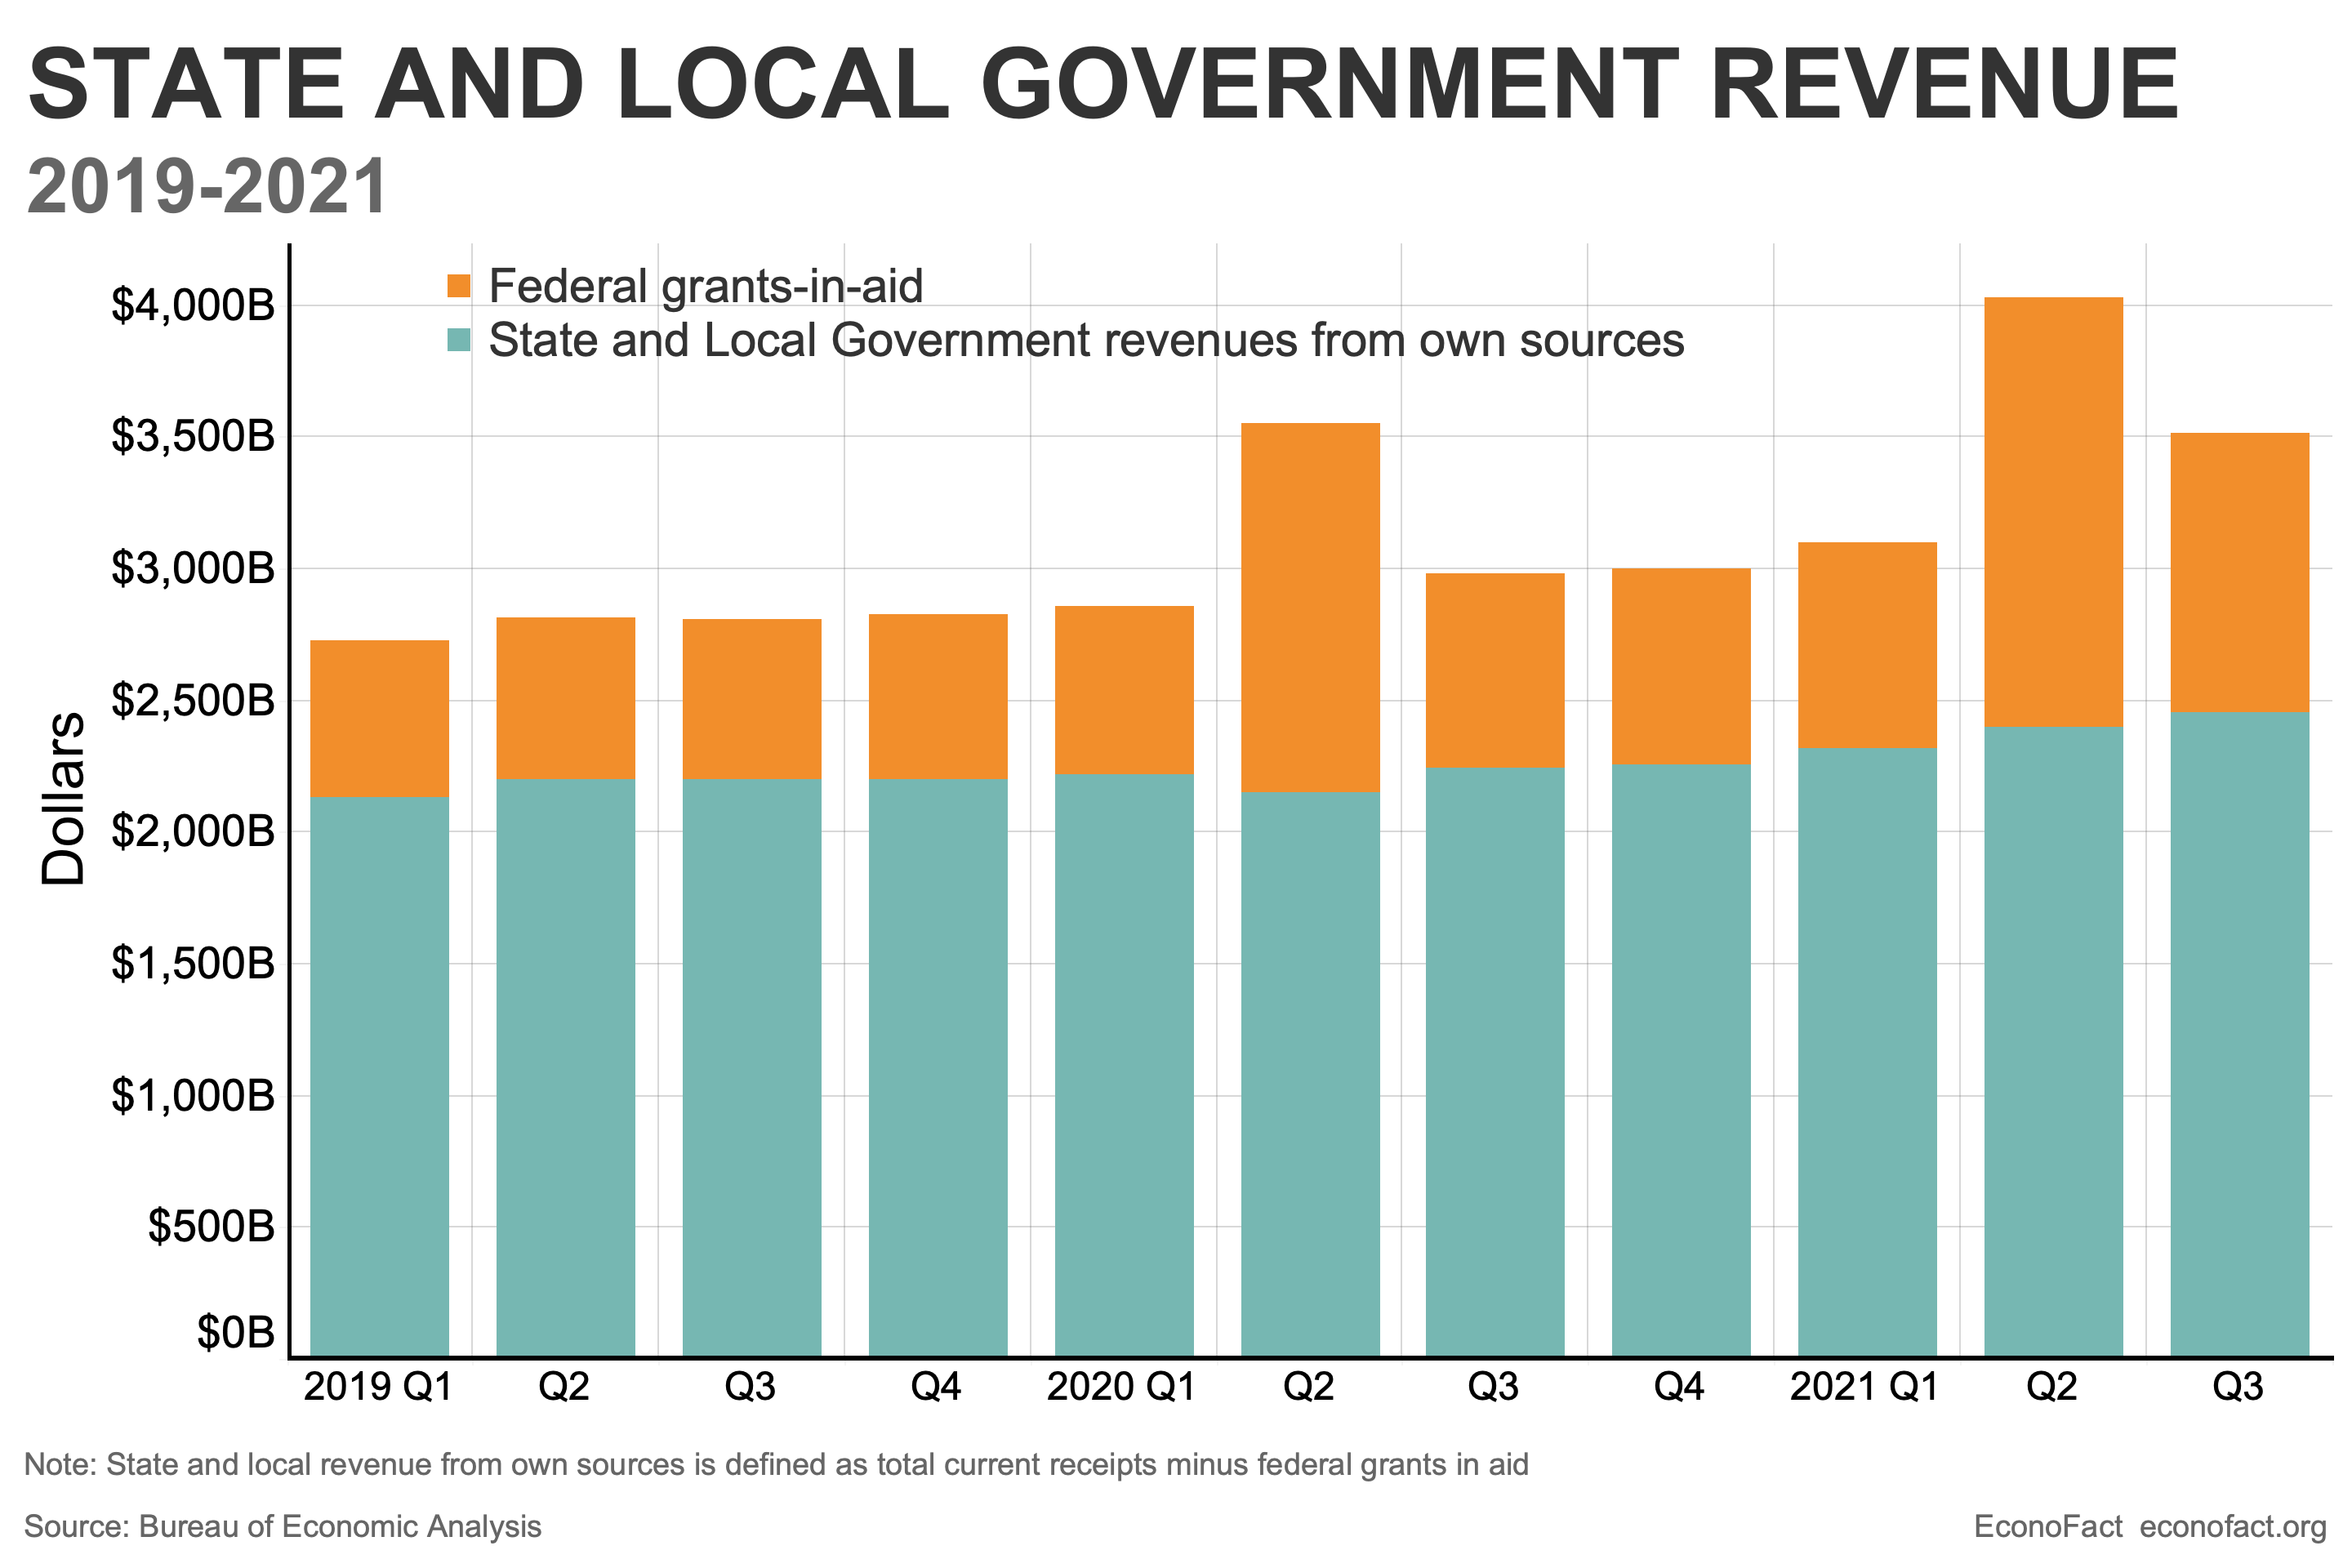 Bar graph of state and local government revenue 2019-21 